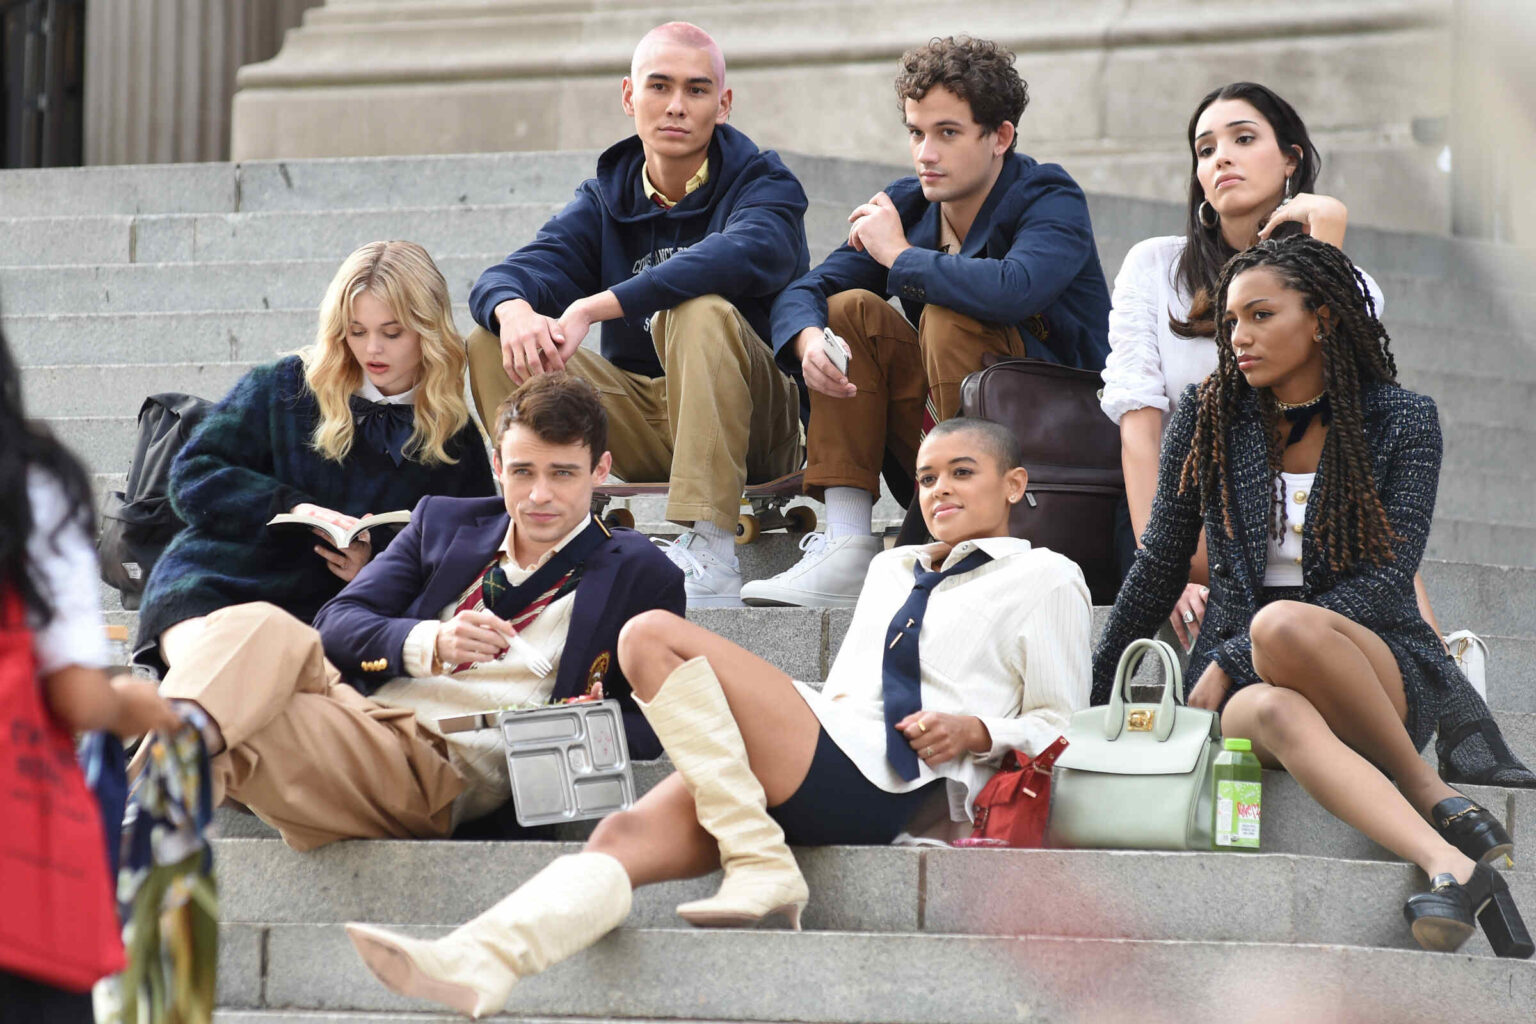 Is the reboot a flop? Do we even care to find out who Gossip Girl is? Critics and fans are spilling the tea on the revival of the classic series.